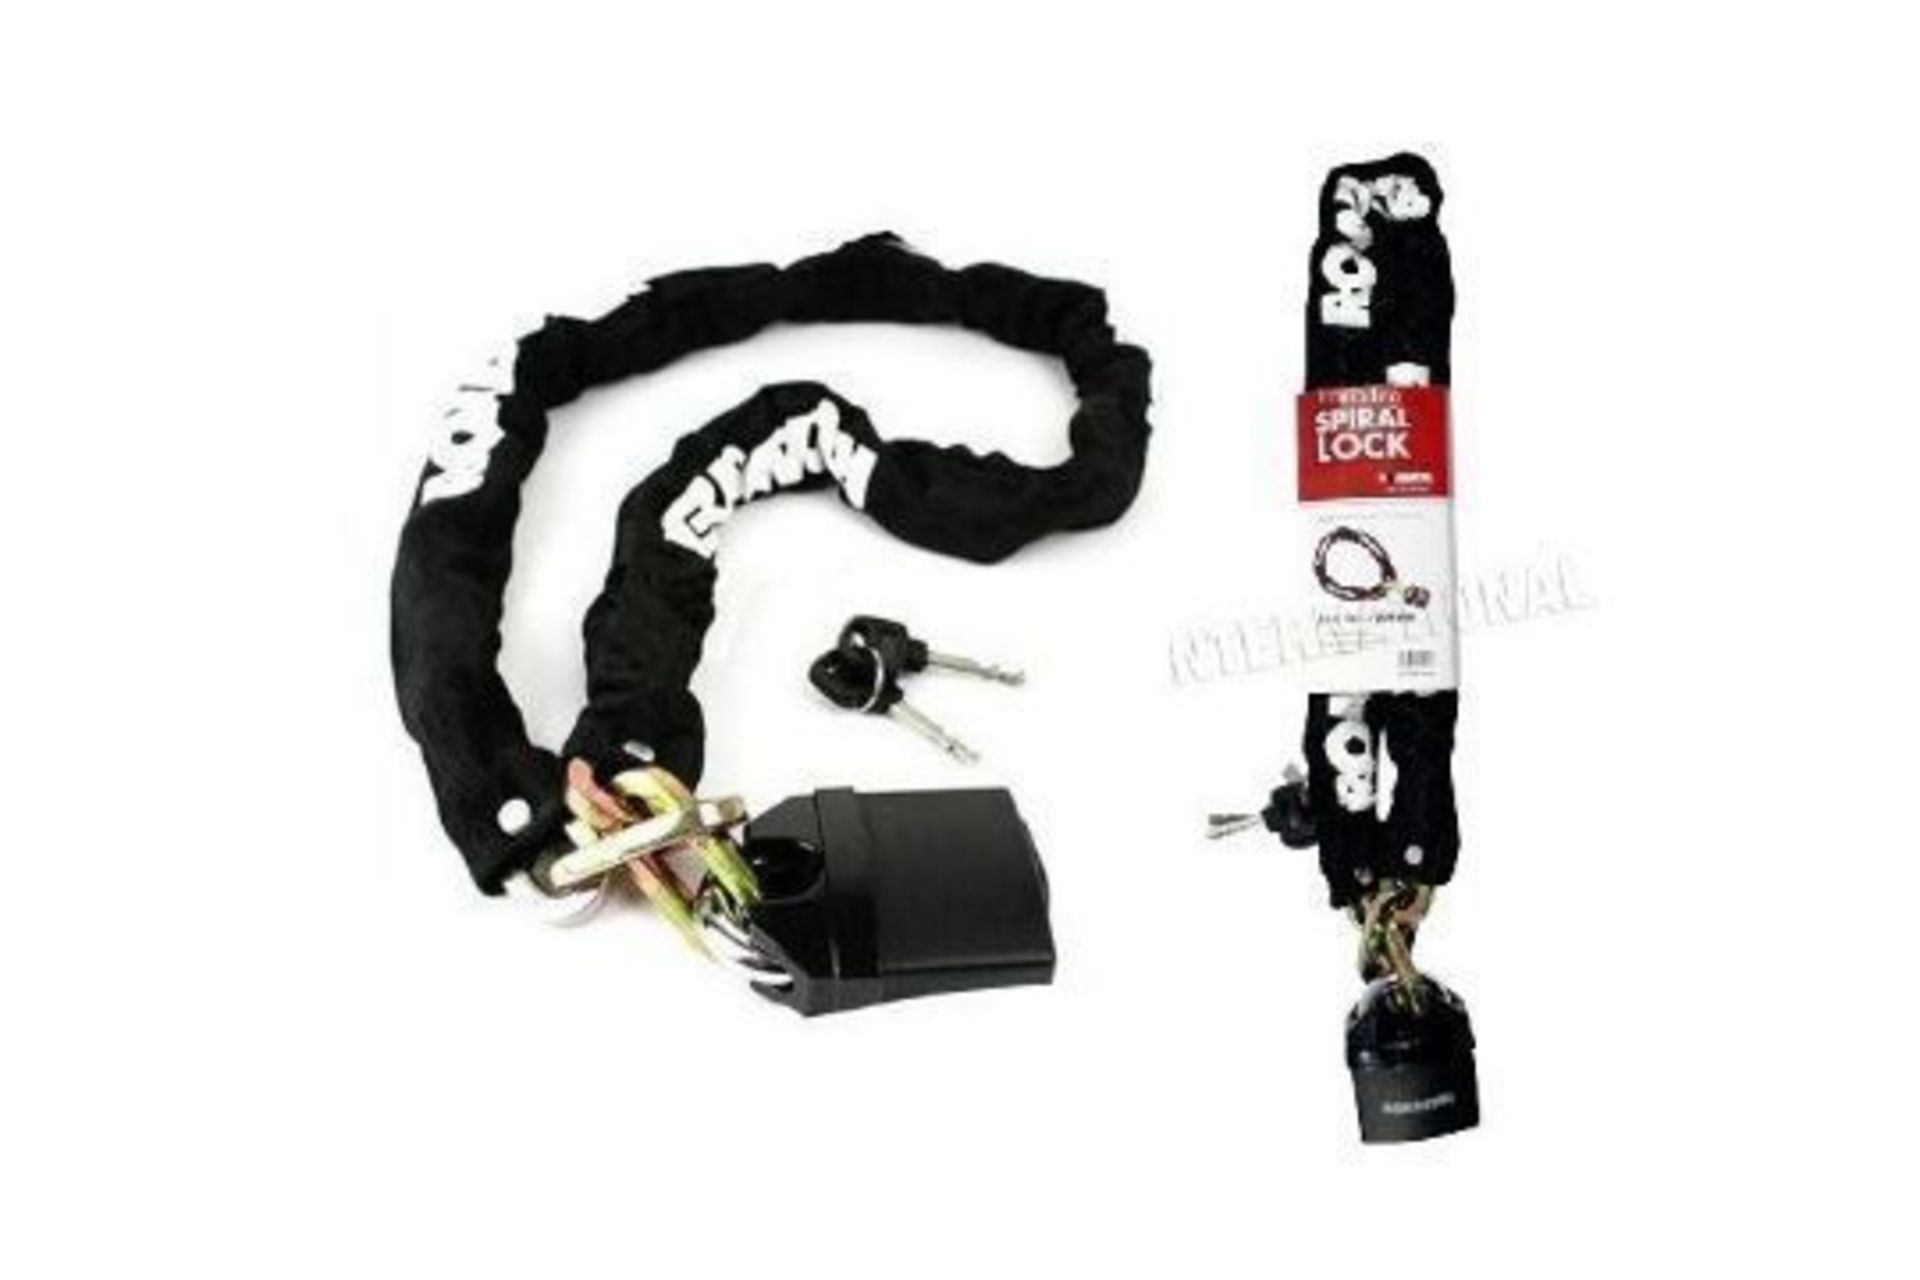 New Roadster 2m Chain With Padlock